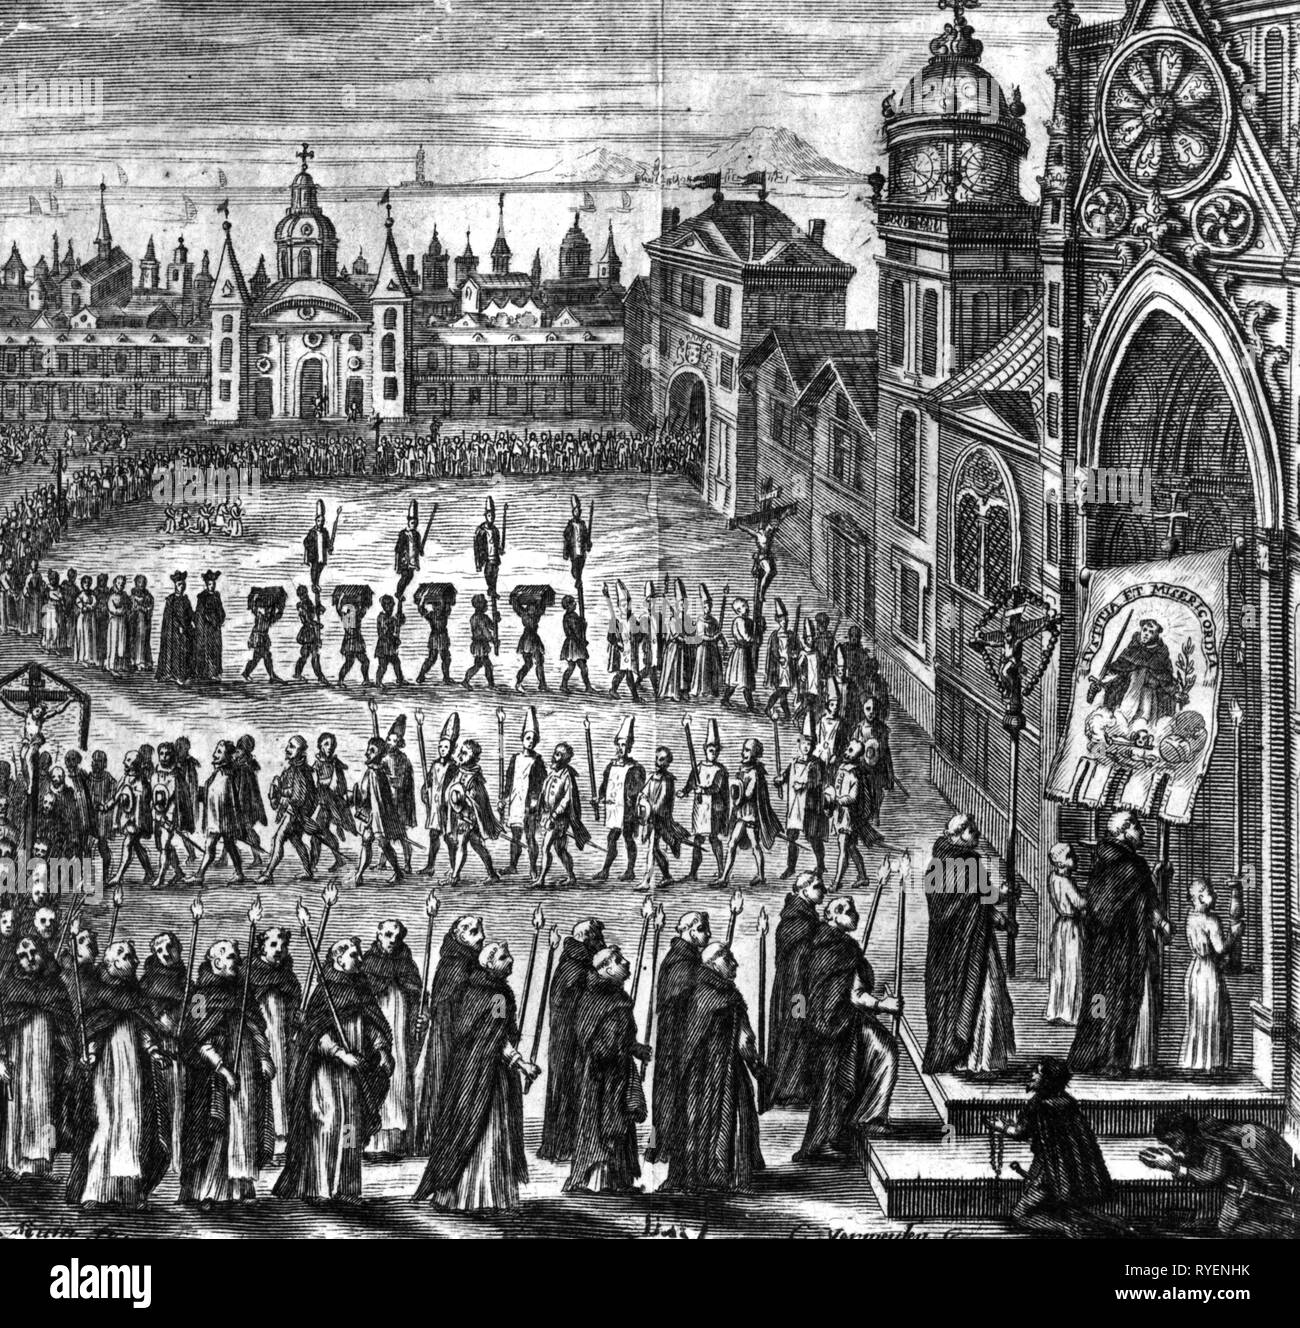 justice, inquisition, auto-da-fe, procession of inquisitors and convicts to the church, Lima, by C.Vermeulen, copper engraving, 17th century, 17th century, graphic, graphics, jurisdiction, court of justice, courts of justice, South America, Peru, religion, religions, Christianity, Catholicism, heresies, heresy, heretic, church, churches, crucifix, crucifixes, convict, holy Officium, candle, candles, clergyman justice, cleric, clerics, monk, monks, Dominican, procession, auto-da-fe, auto da fe, inquisitor, inquisitors, Lima, historic, historical, , Additional-Rights-Clearance-Info-Not-Available Stock Photo